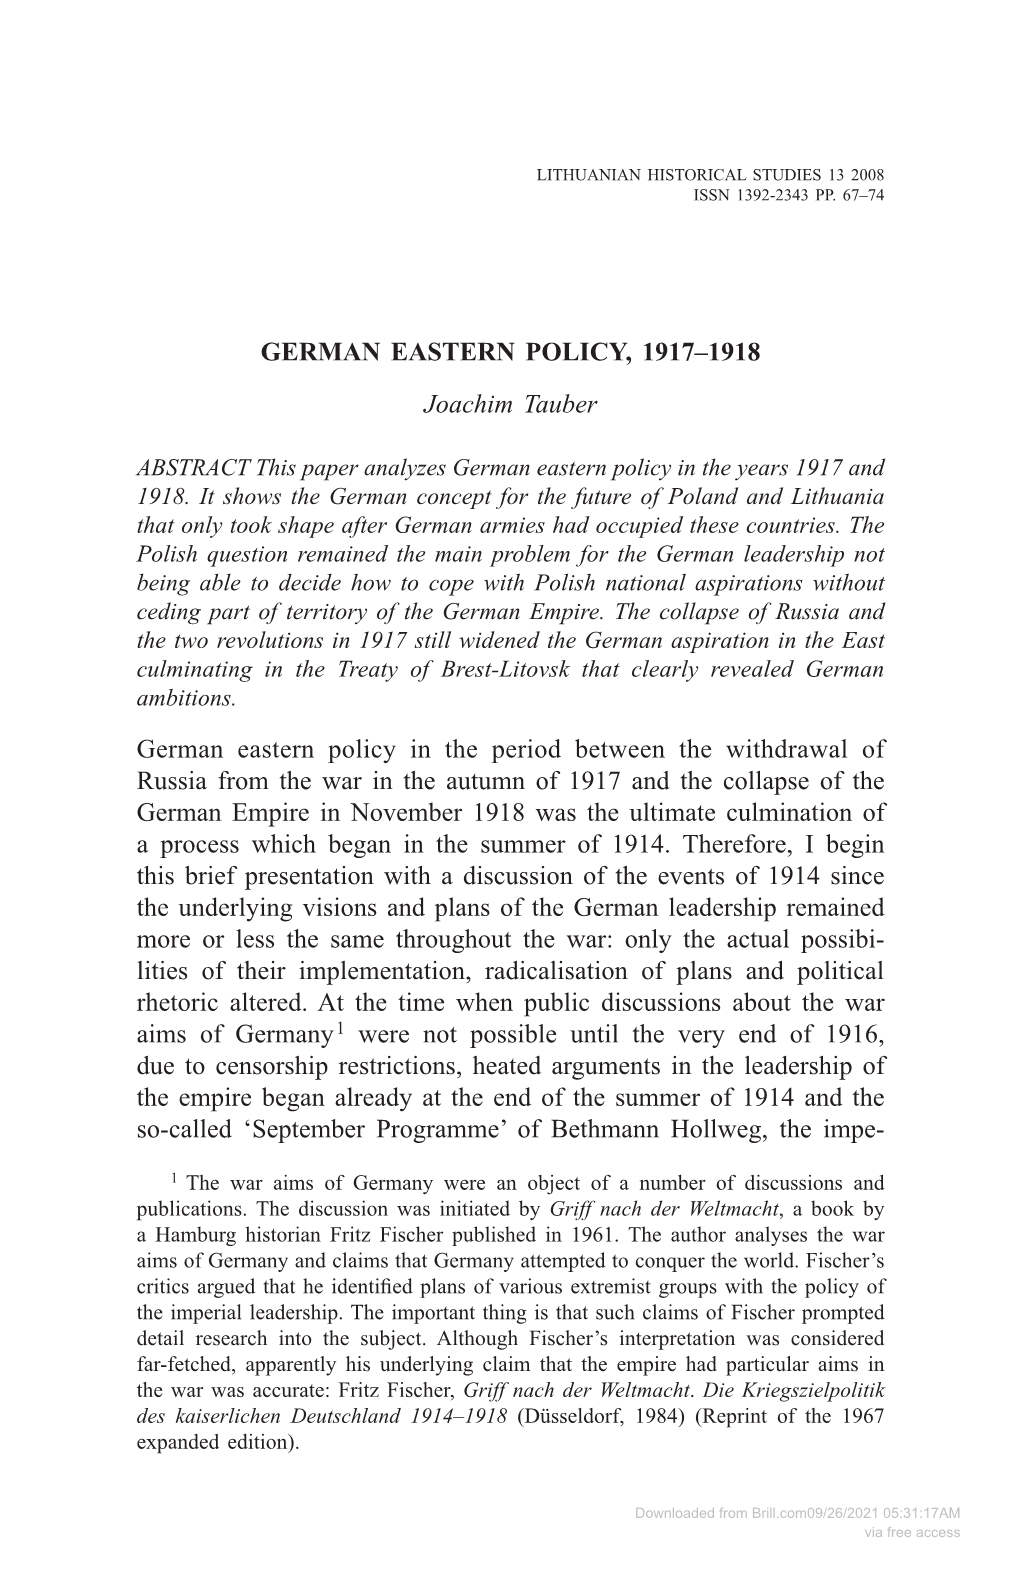 German Eastern Policy, 1917–1918 Joachim Tauber German Eastern Policy in the Period Between the Withdrawal of Russia From